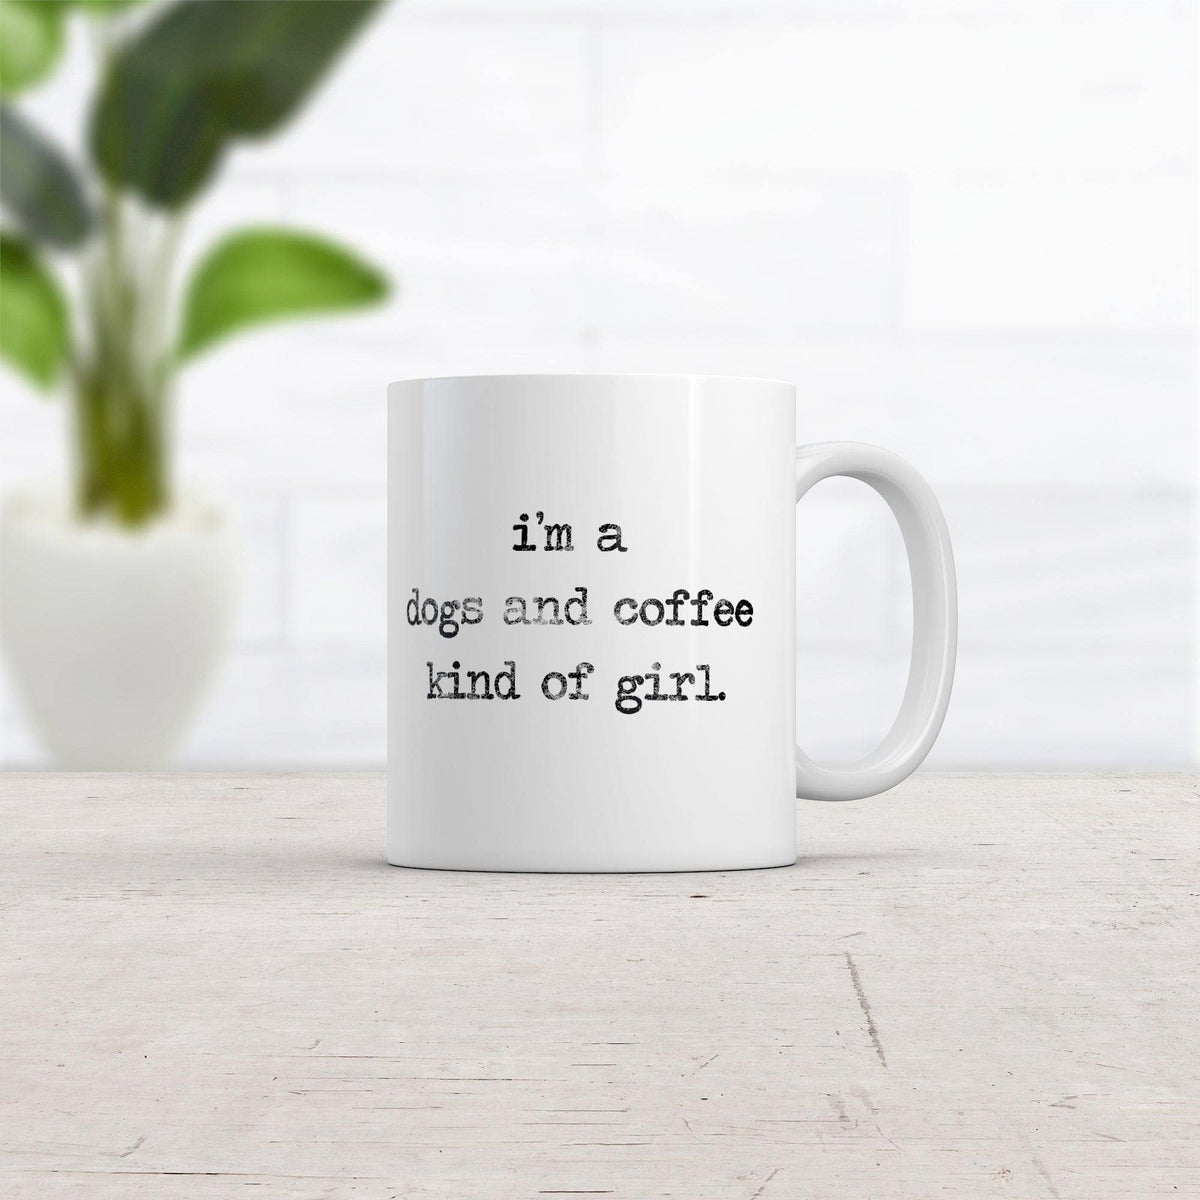 Im A Dogs And Coffee Kind Of Girl Mug Funny Puppy Caffeine Lovers Novelty Cup-11oz  -  Crazy Dog T-Shirts